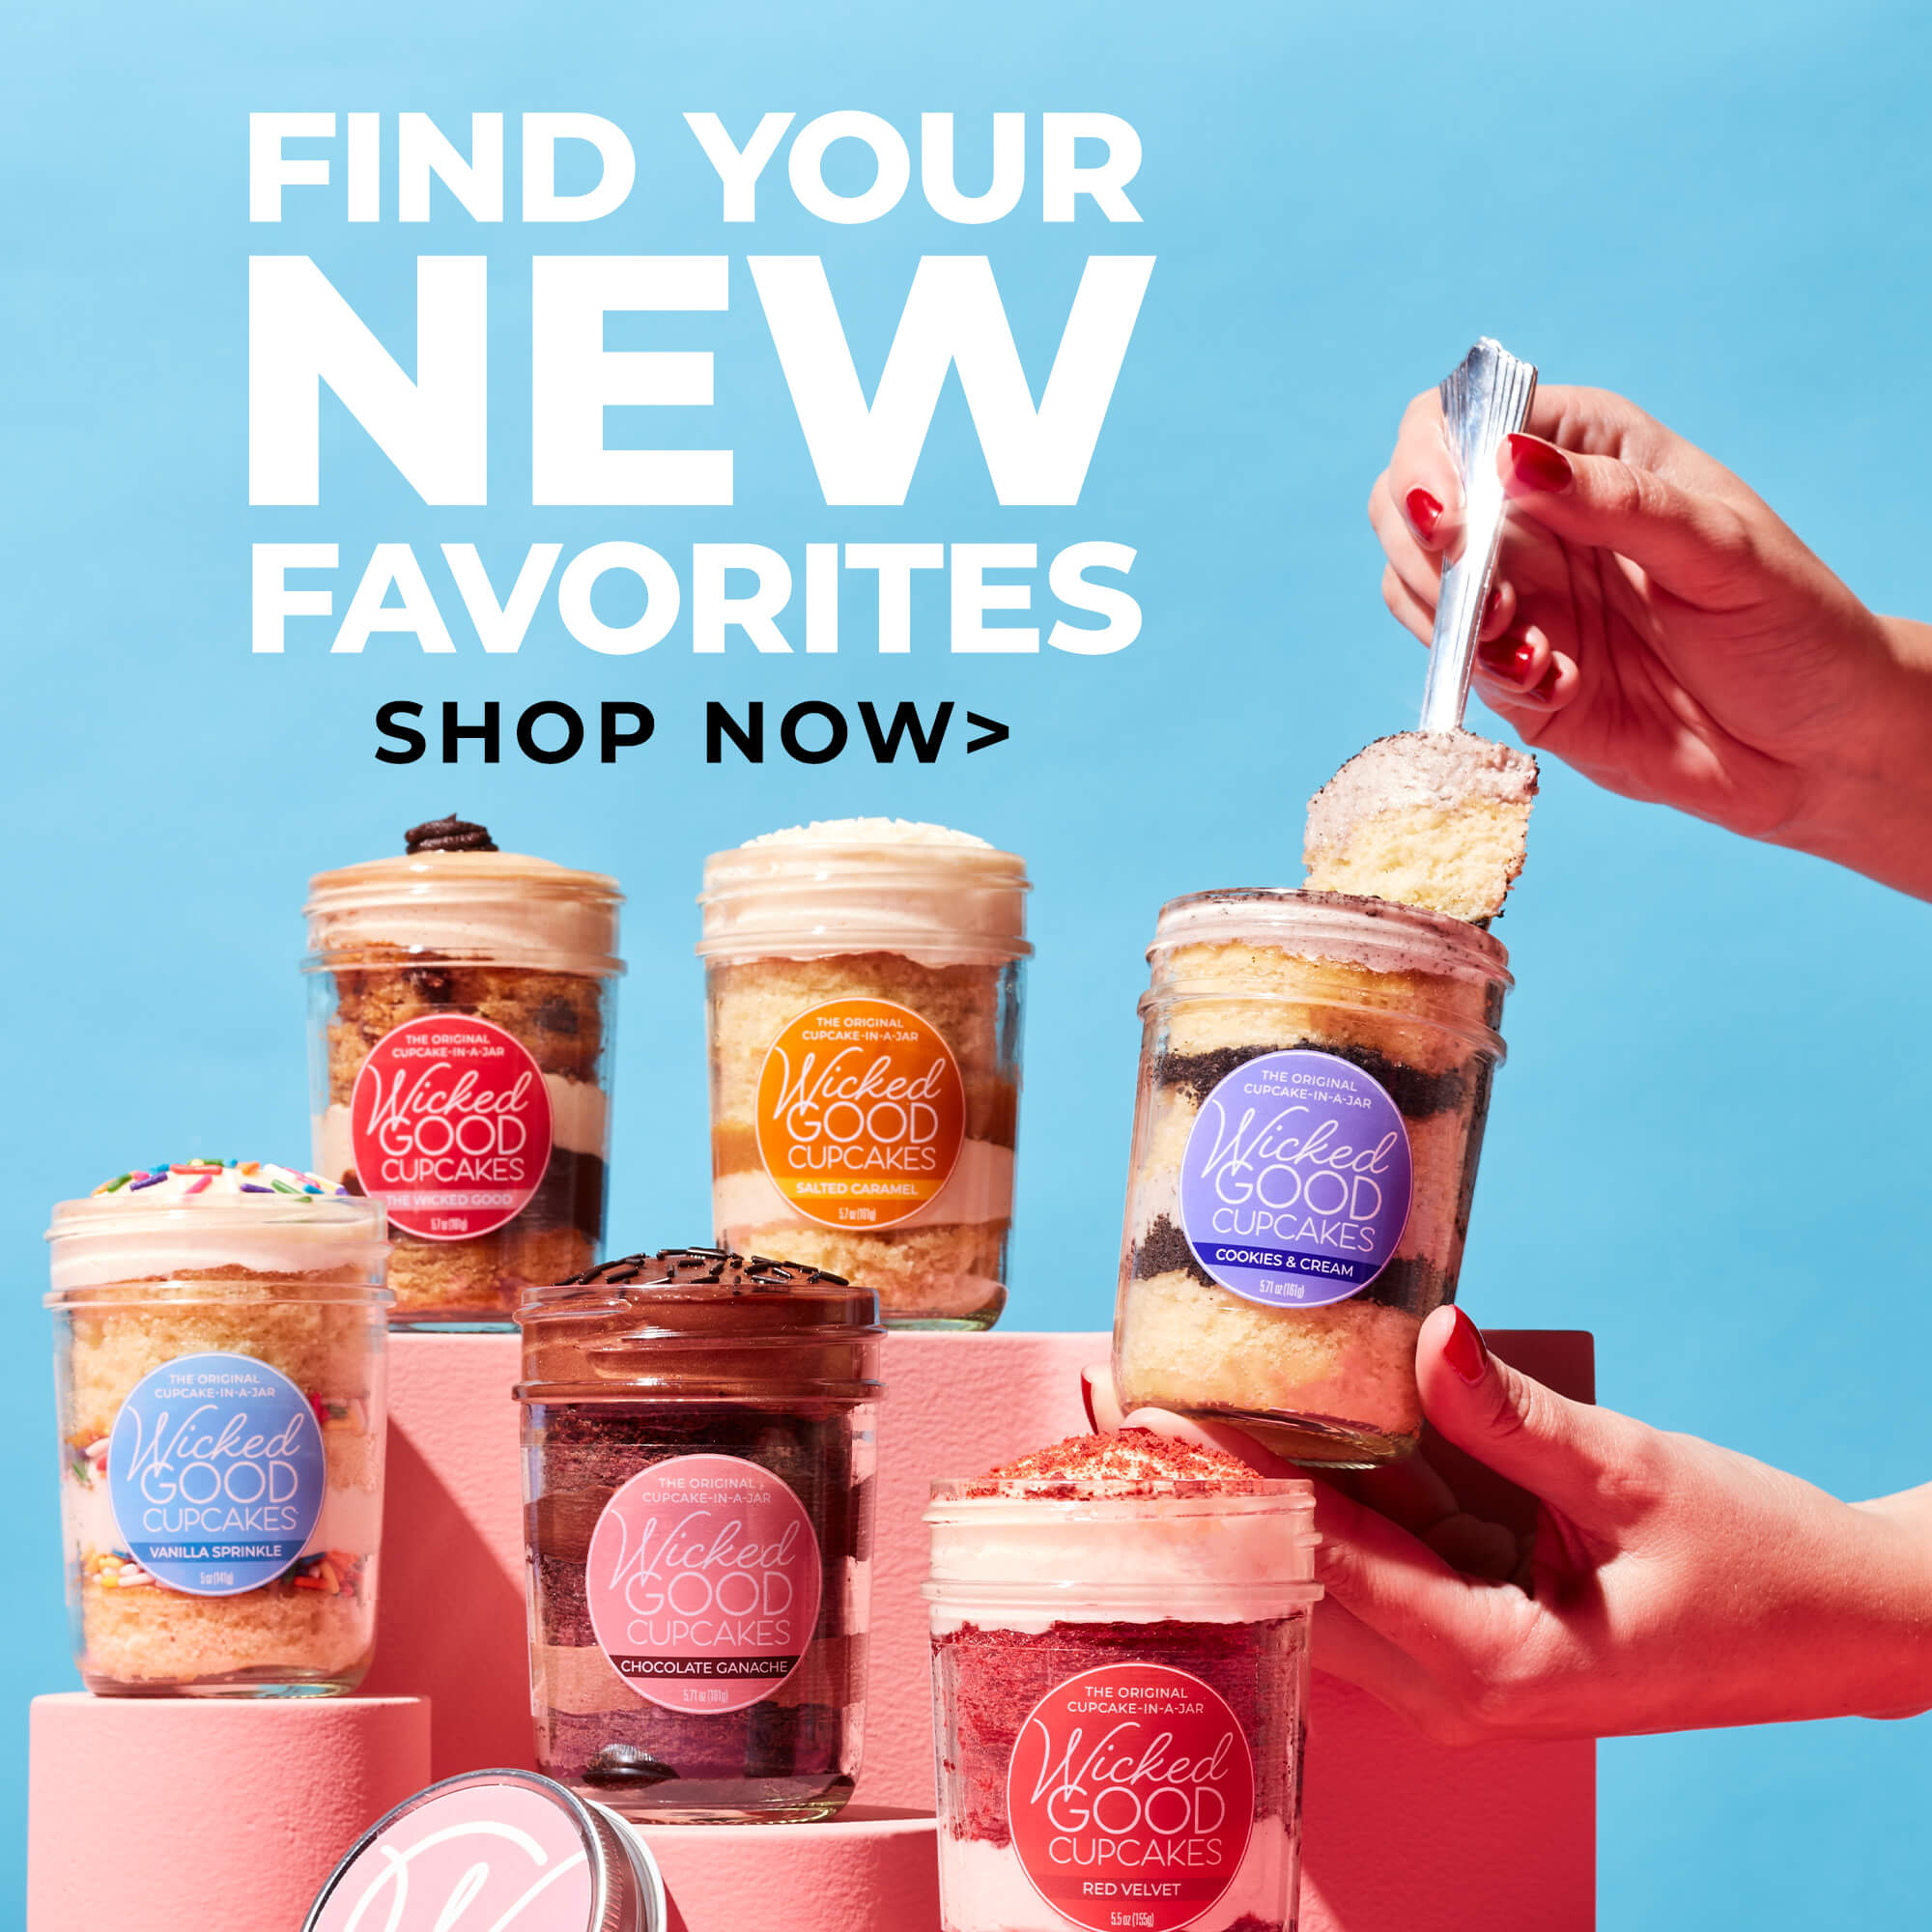 Find your new favorites. Shop now.